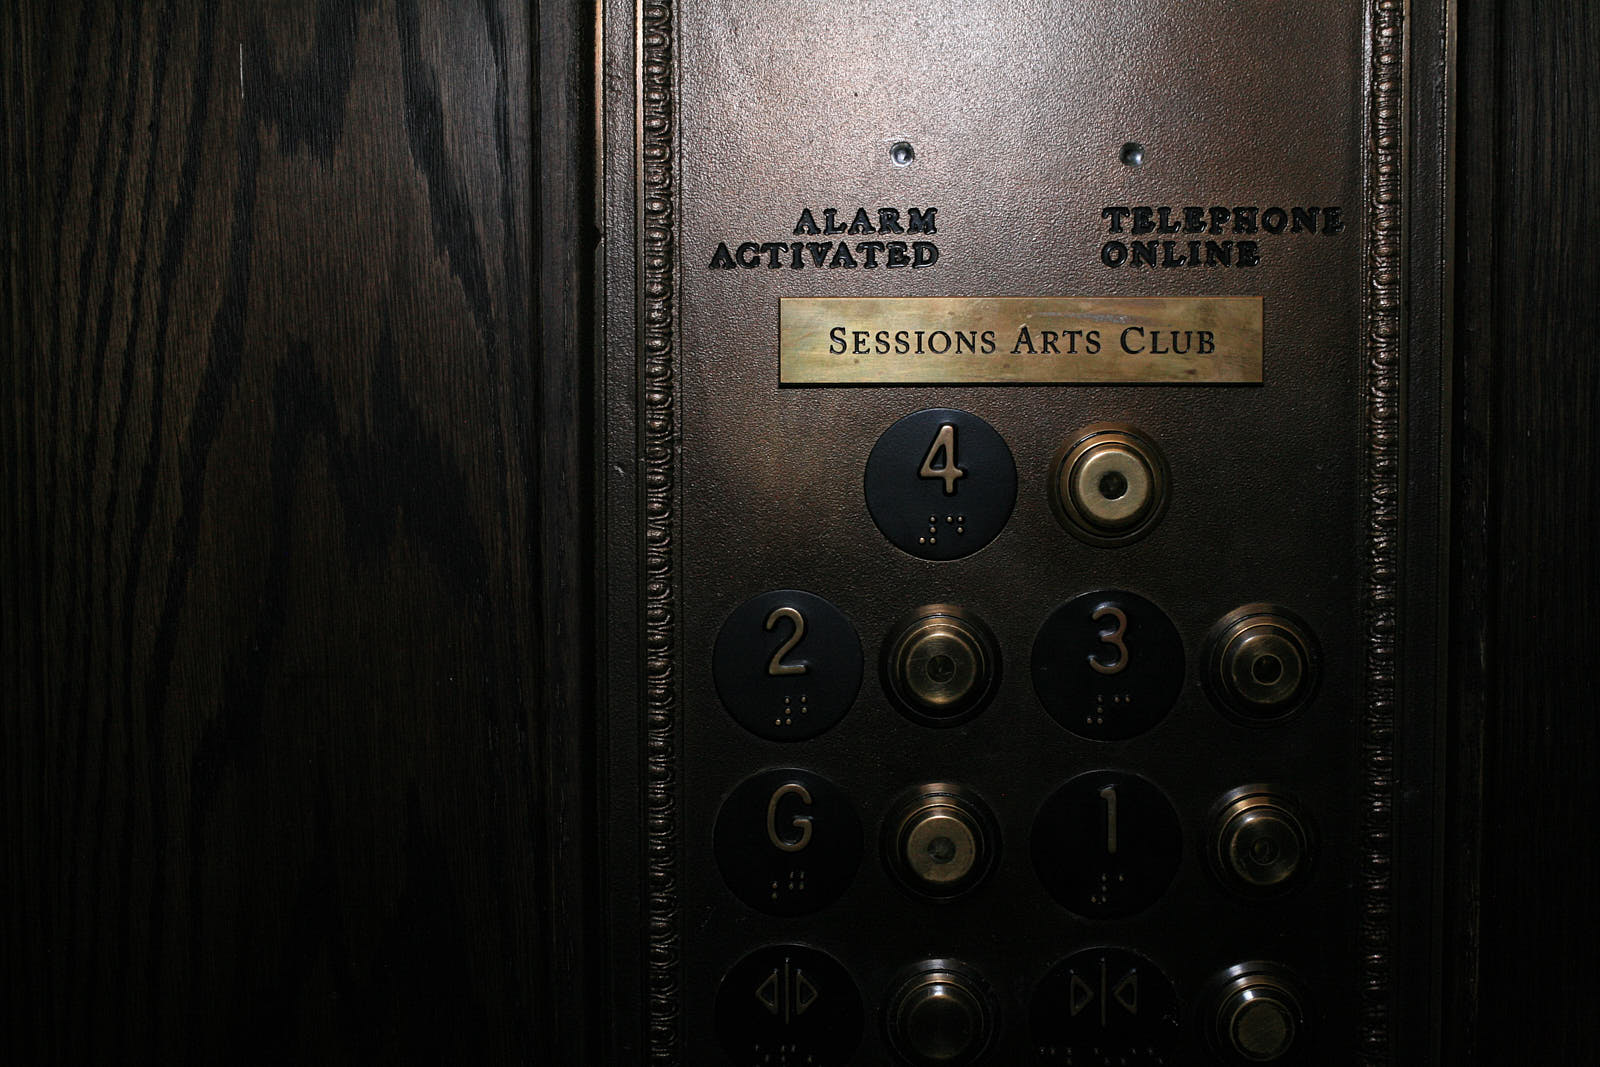 The lift to Sessions Arts Club, whose entrance offers an air of “if you know, you know” to the occasion.